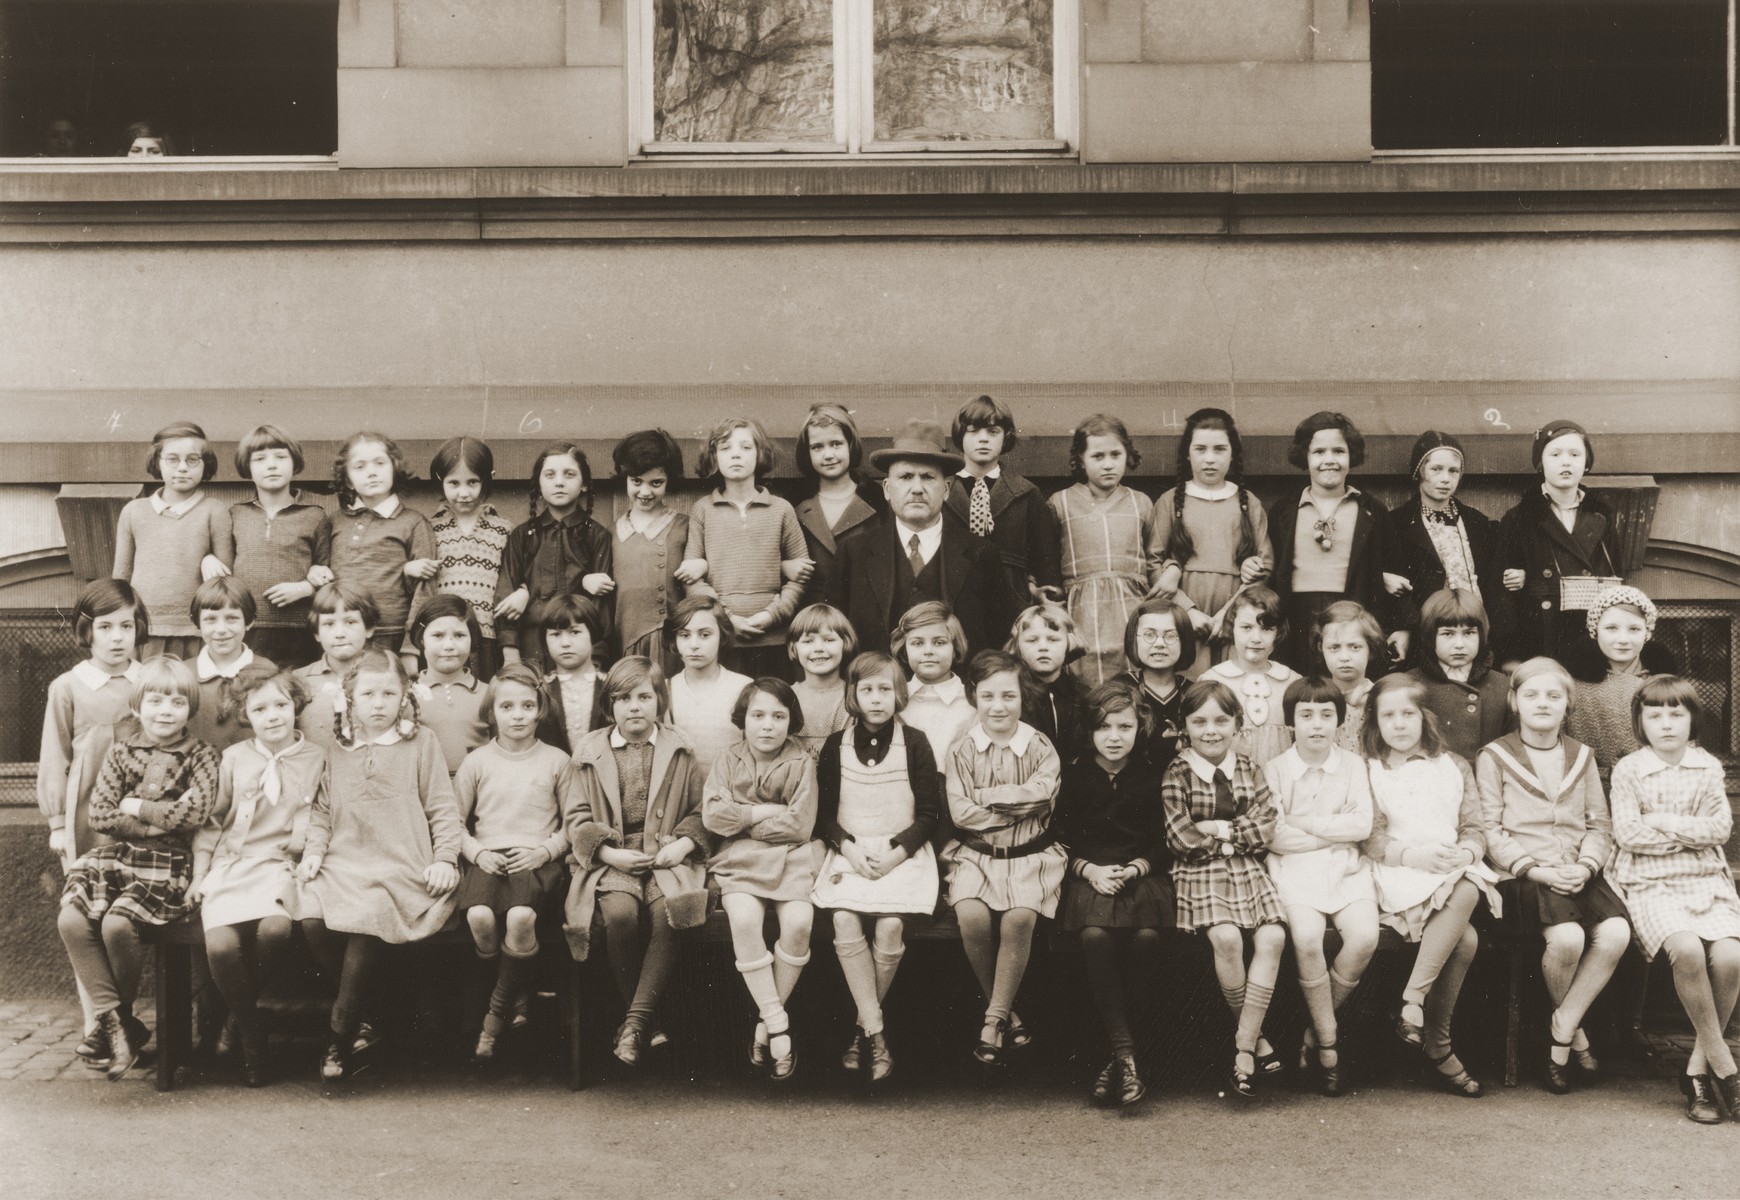 Group portrait of students at the Holzhausen Schule, an elementary school in Frankfurt.  

Lore Gotthelf is pictured in the back row, third from the right.